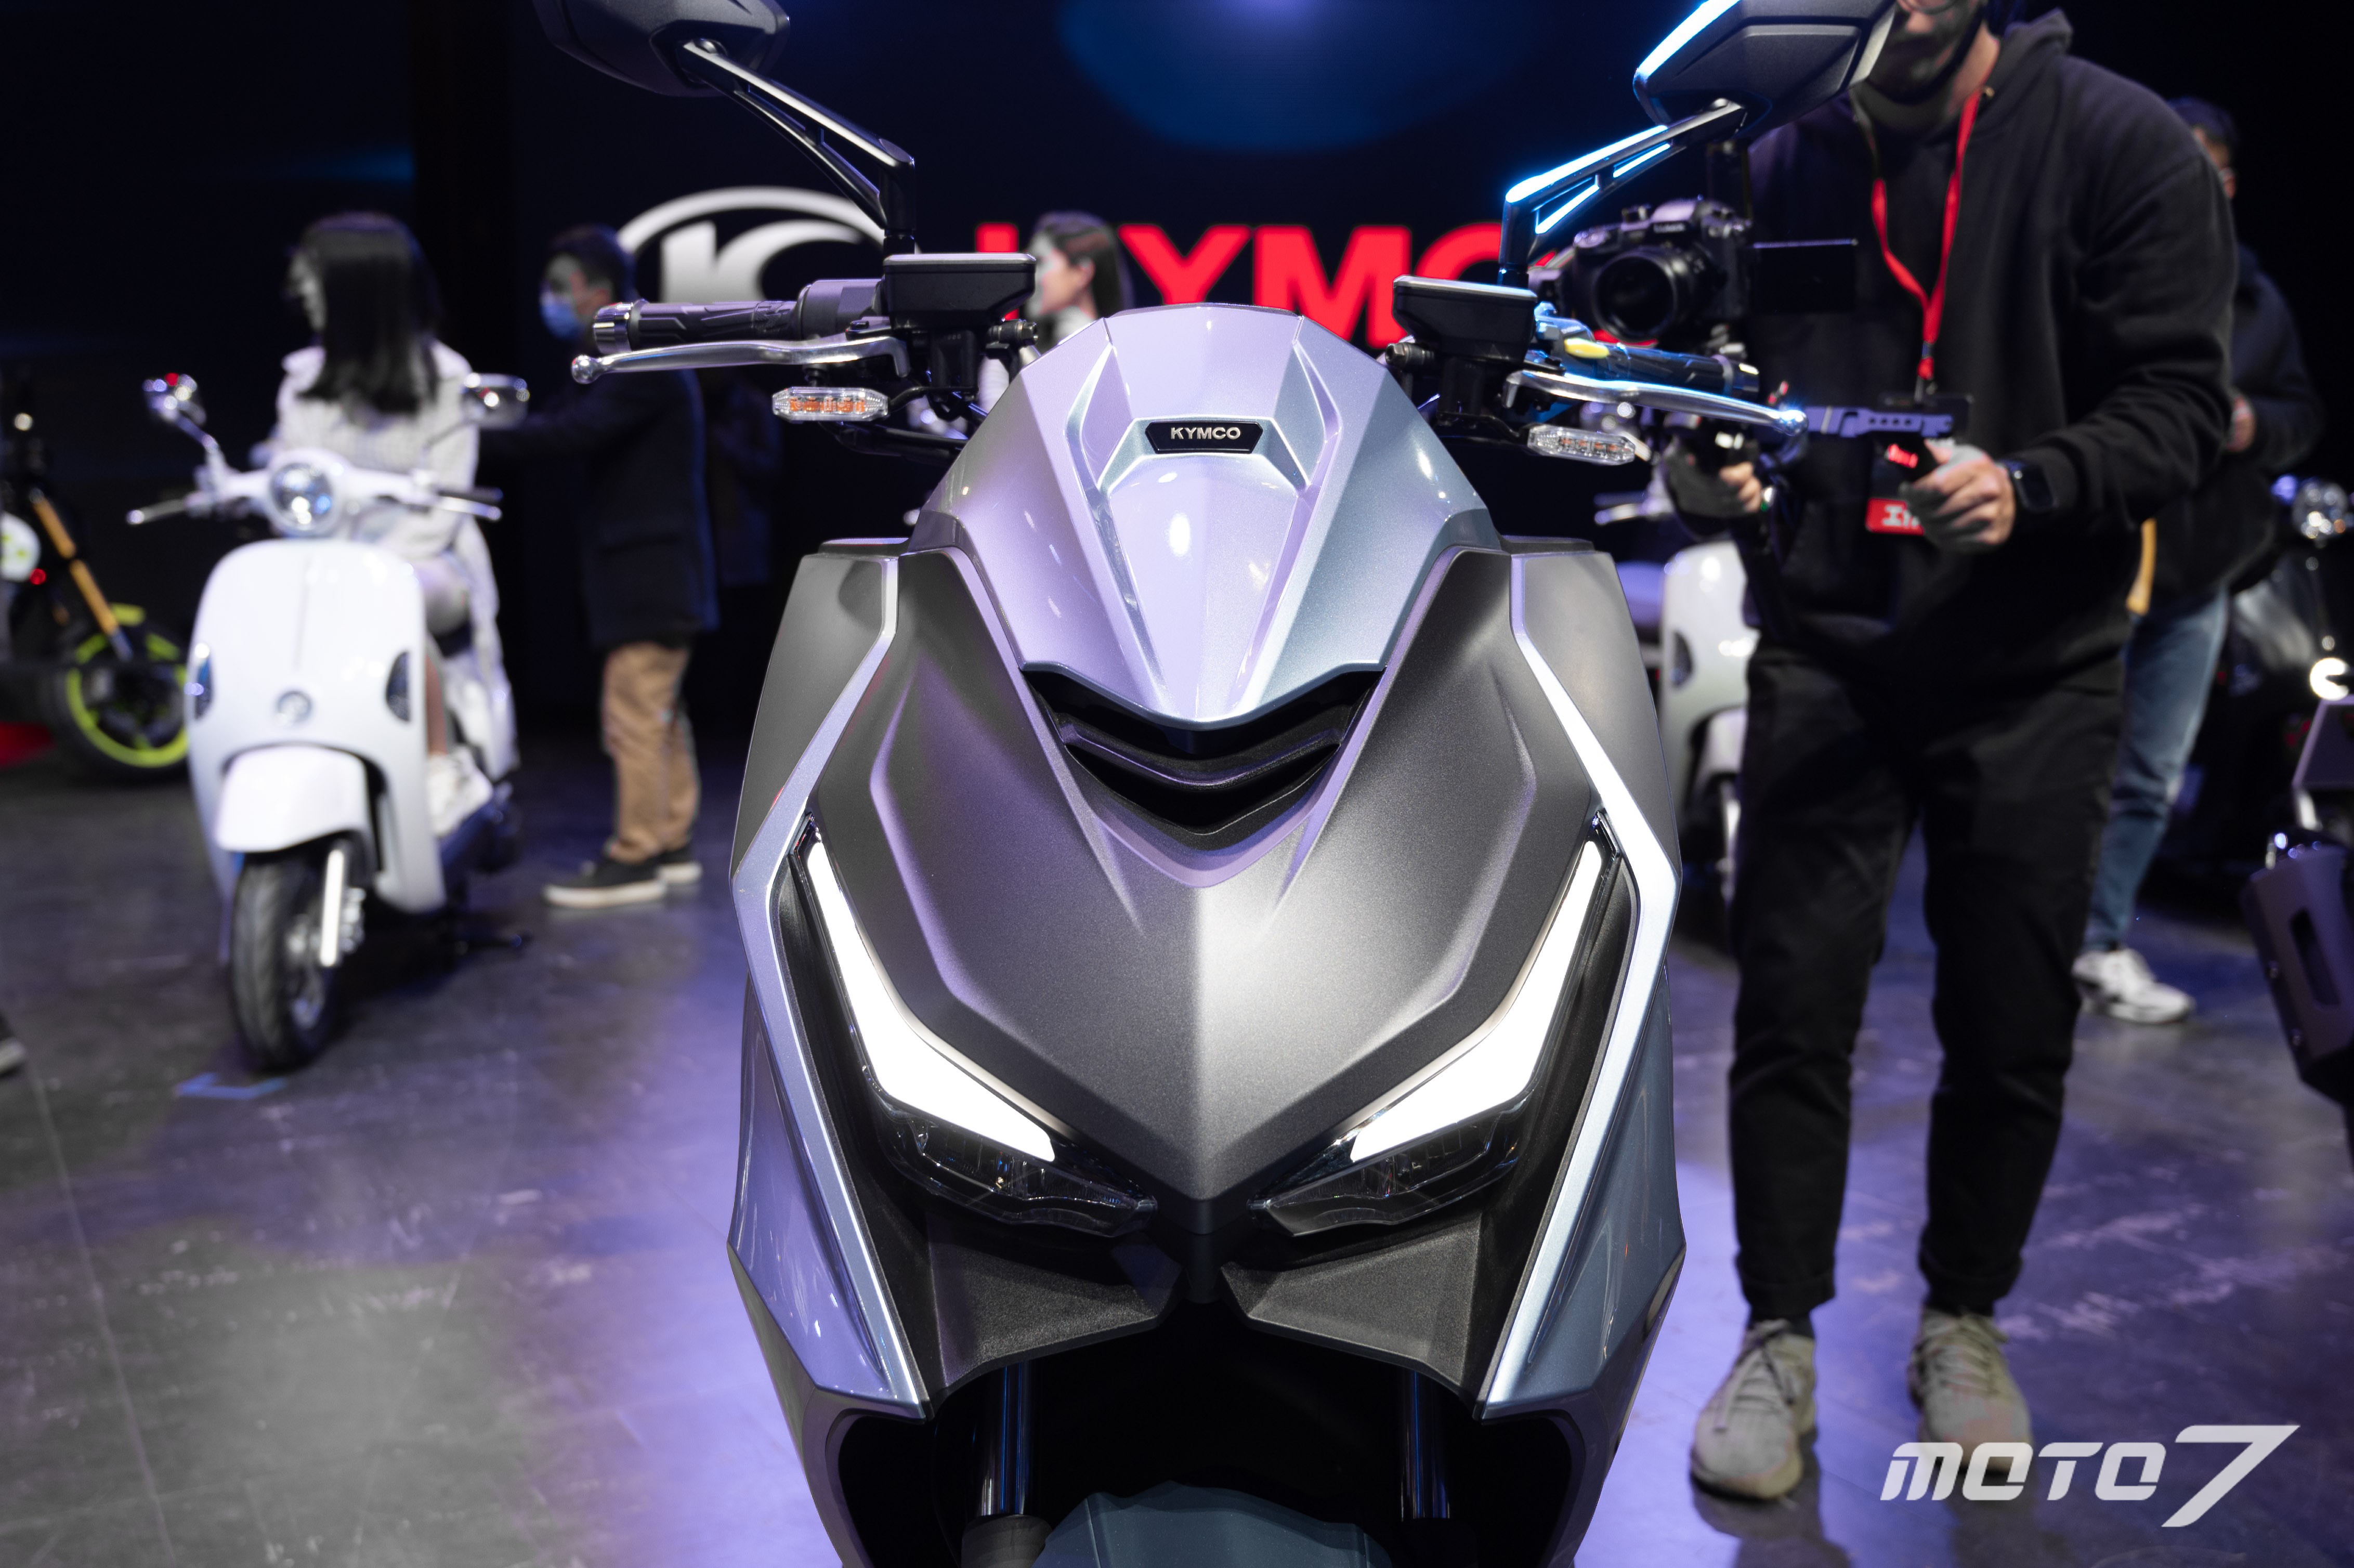 New scooter model priced at 94 million launched, design and power make Honda SH inferior